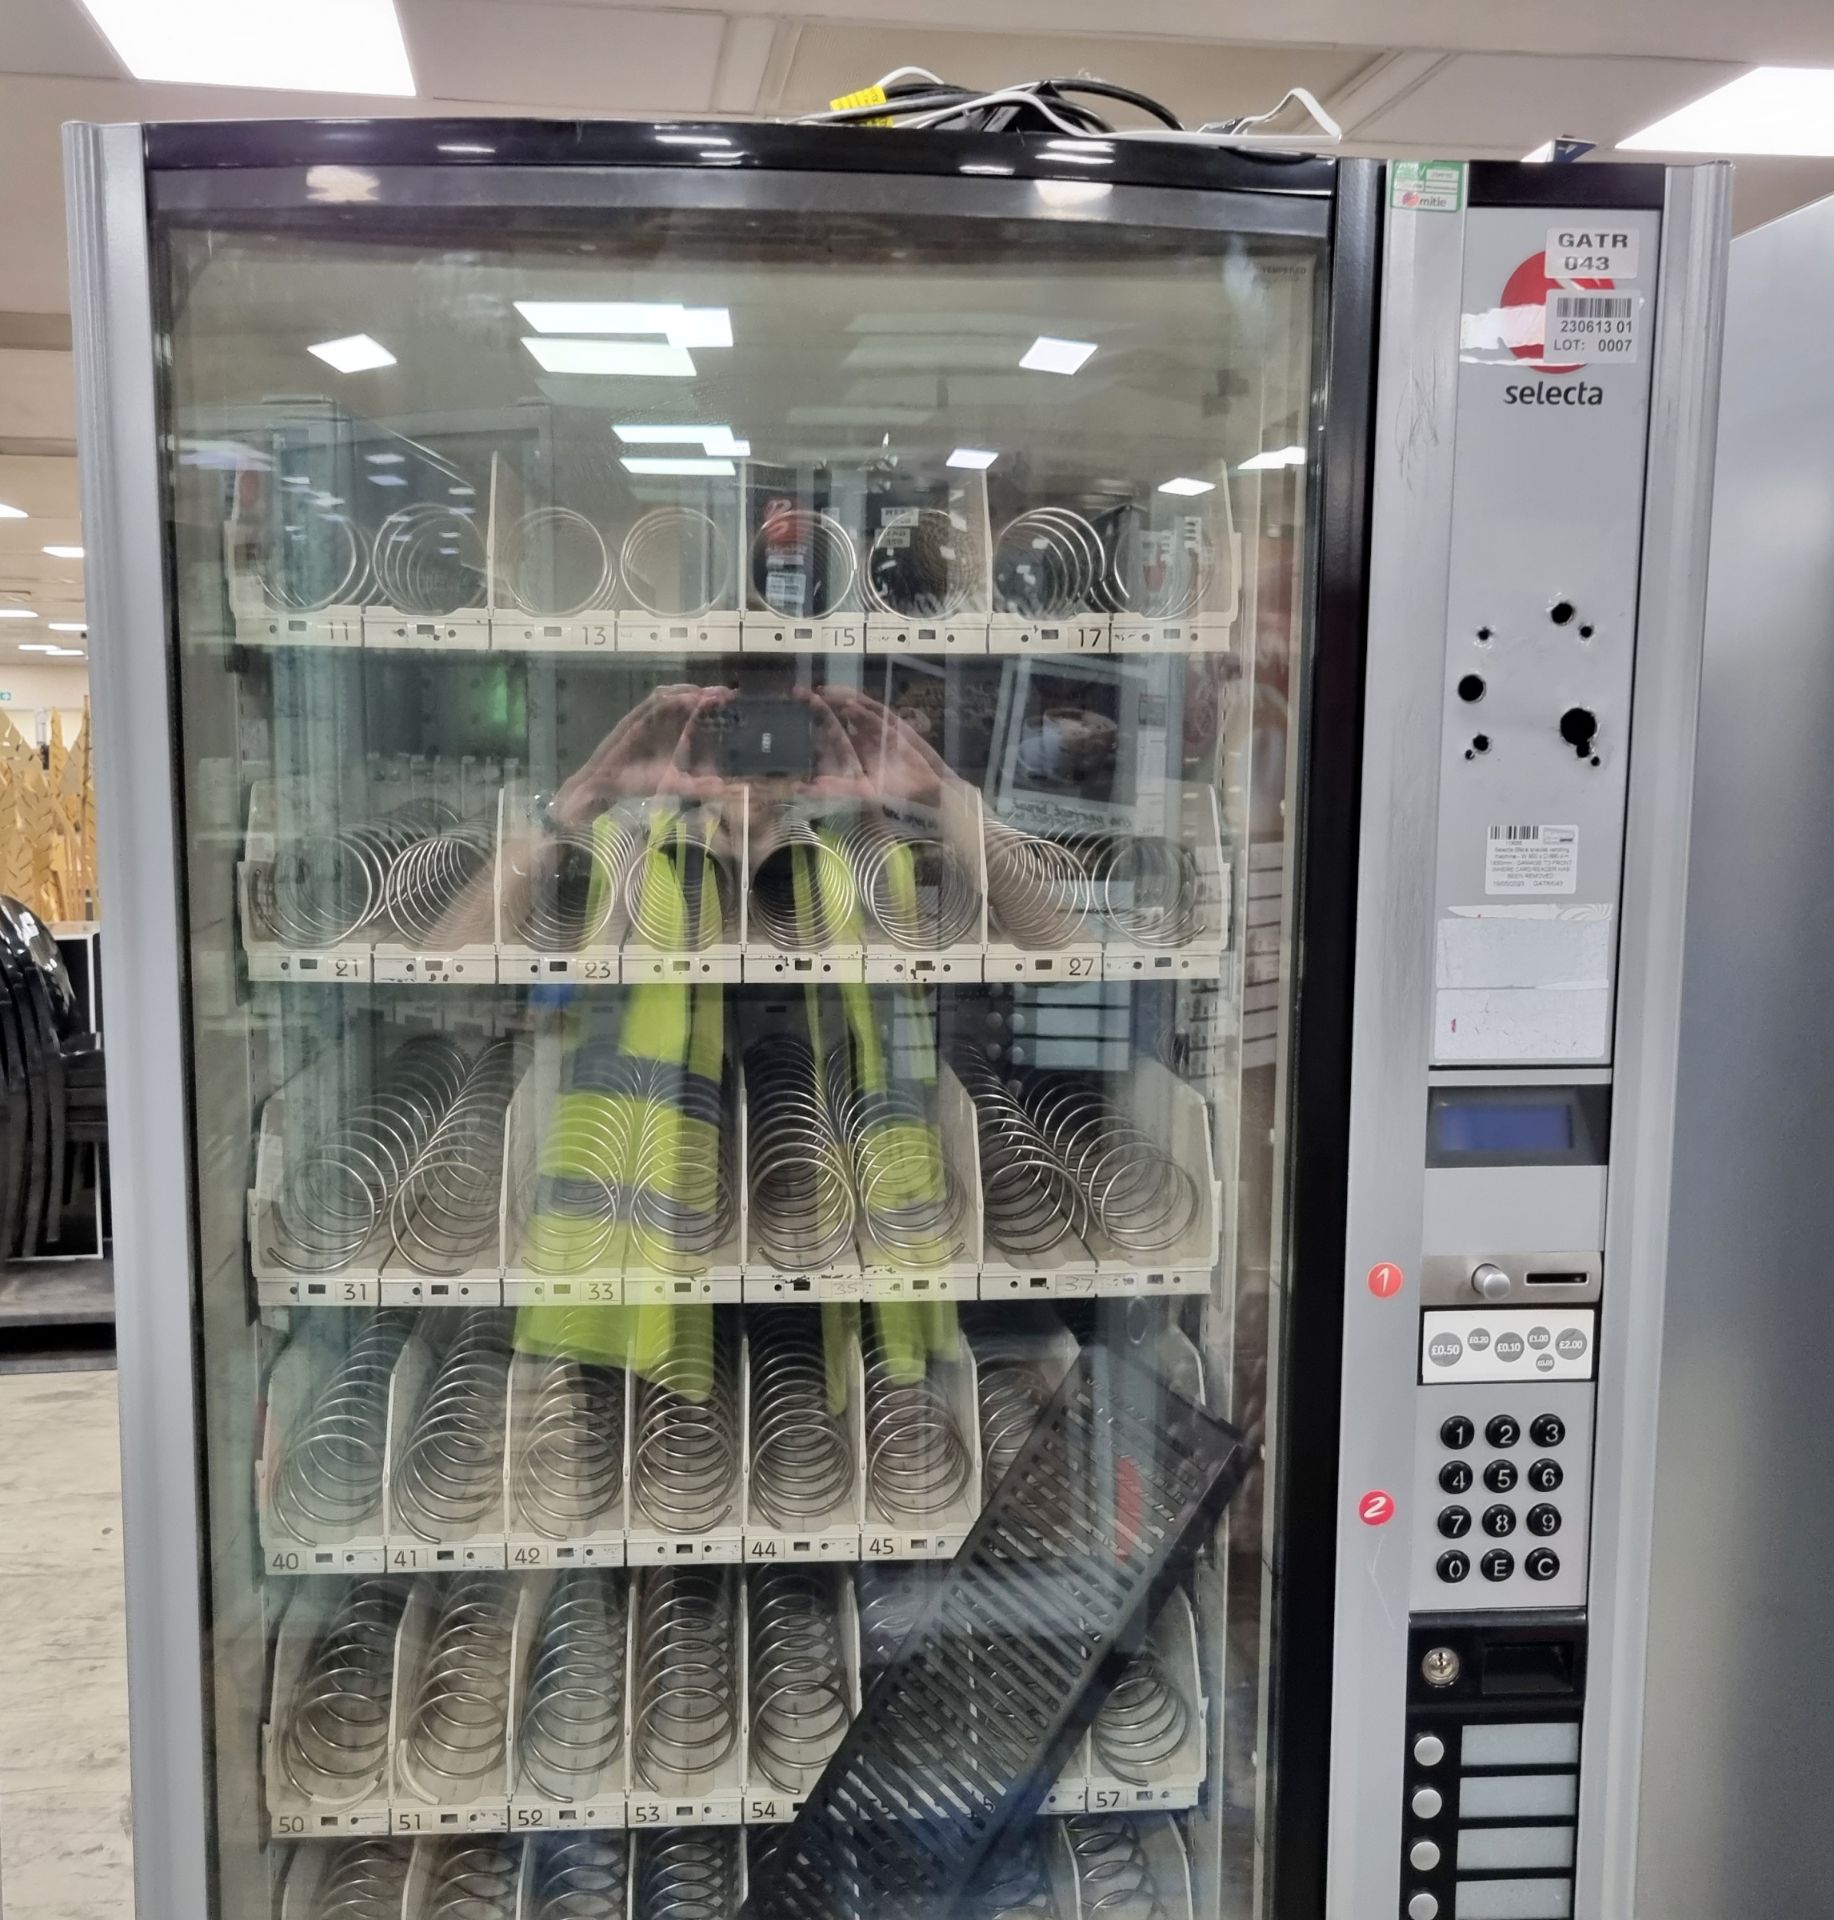 Selecta Sfera snacks vending machine - W 900 x D 890 x H 1830mm - DAMAGE TO FRONT - Image 4 of 6